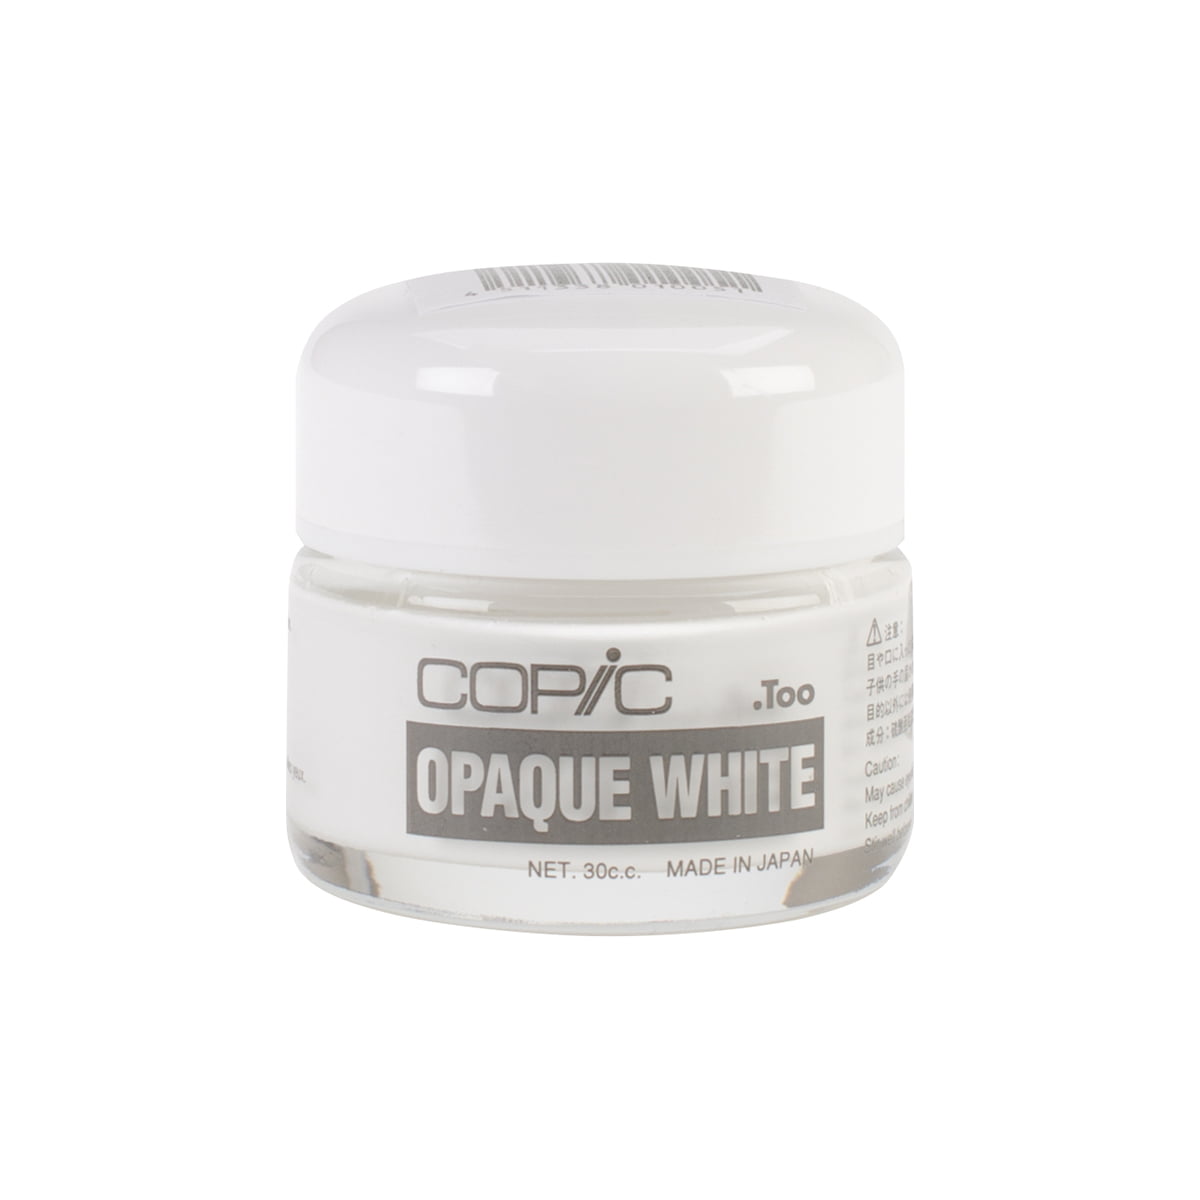 NEW Too Copic Opaque White Pigment 30cc MADE IN JAPAN